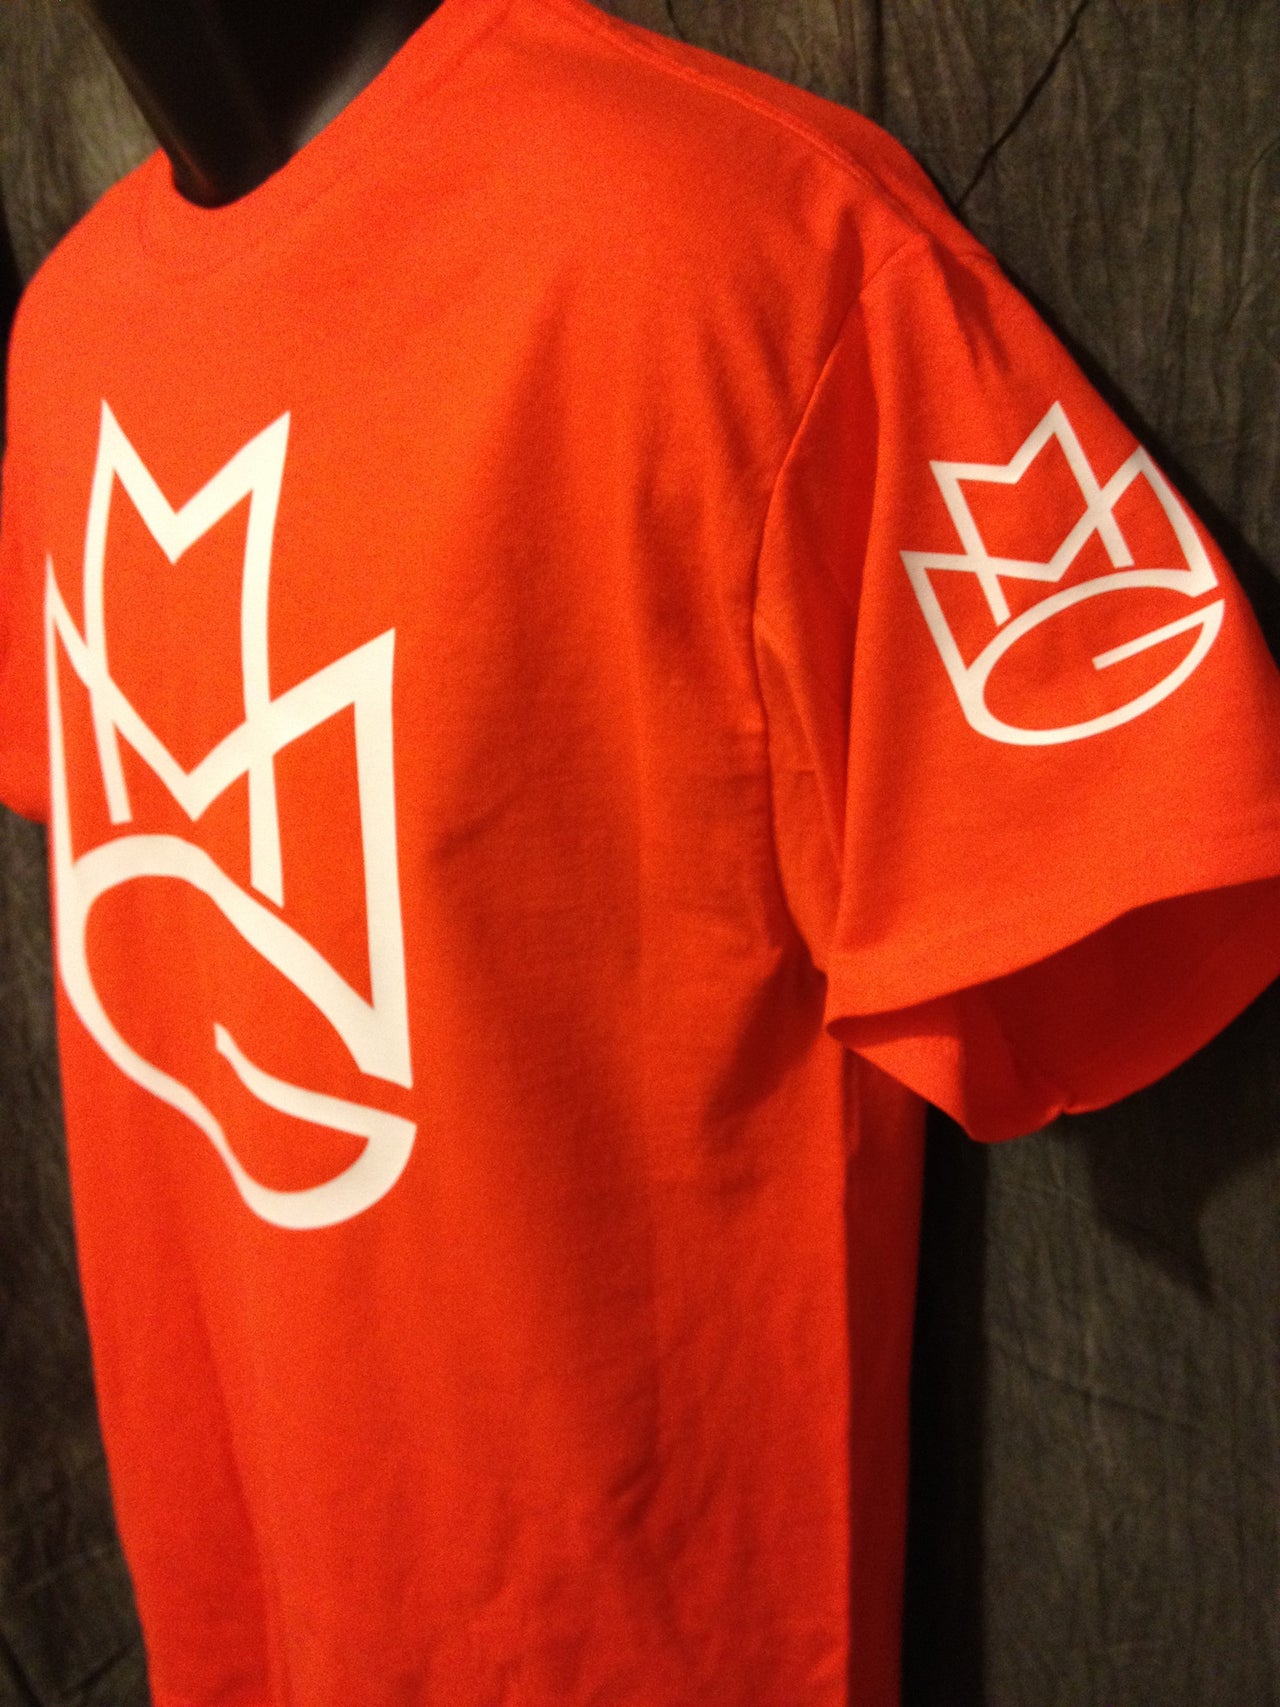 Maybach Music Group Limited Edition Tshirt: Orange with White and Black Print - TshirtNow.net - 3